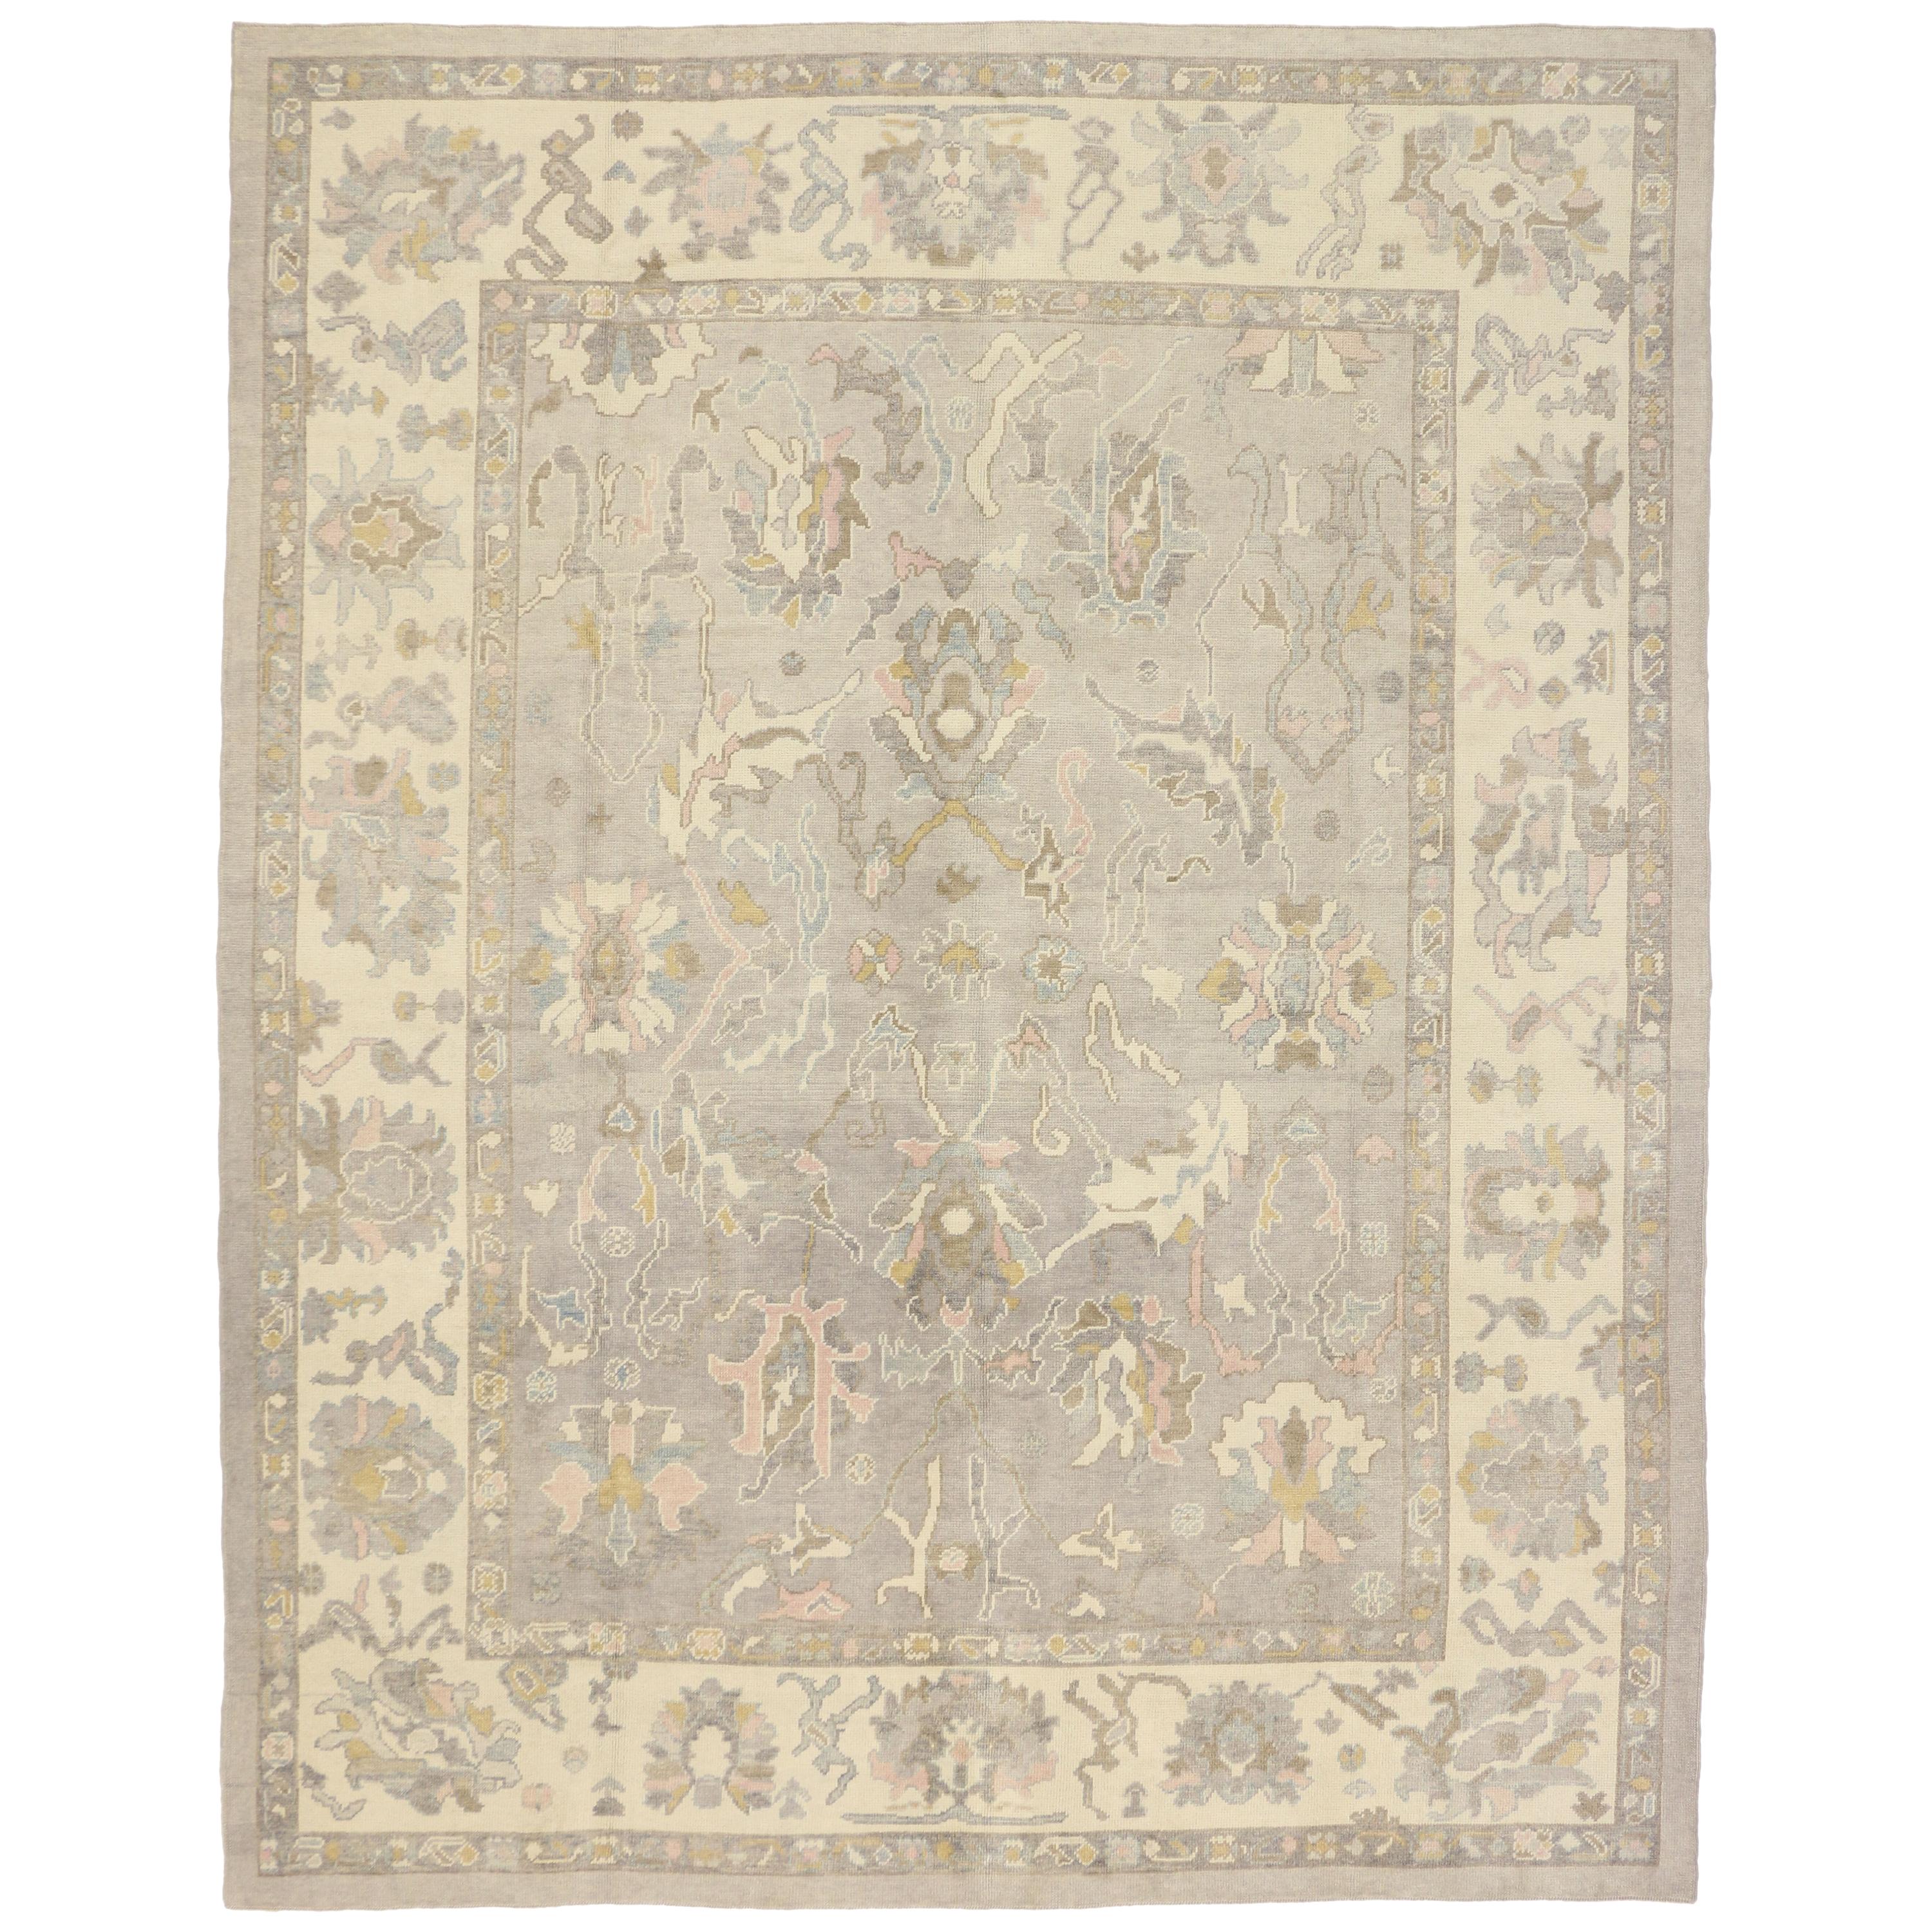 Rustic Farmhouse New Turkish Oushak Area Rug with Light, Neutral Colors